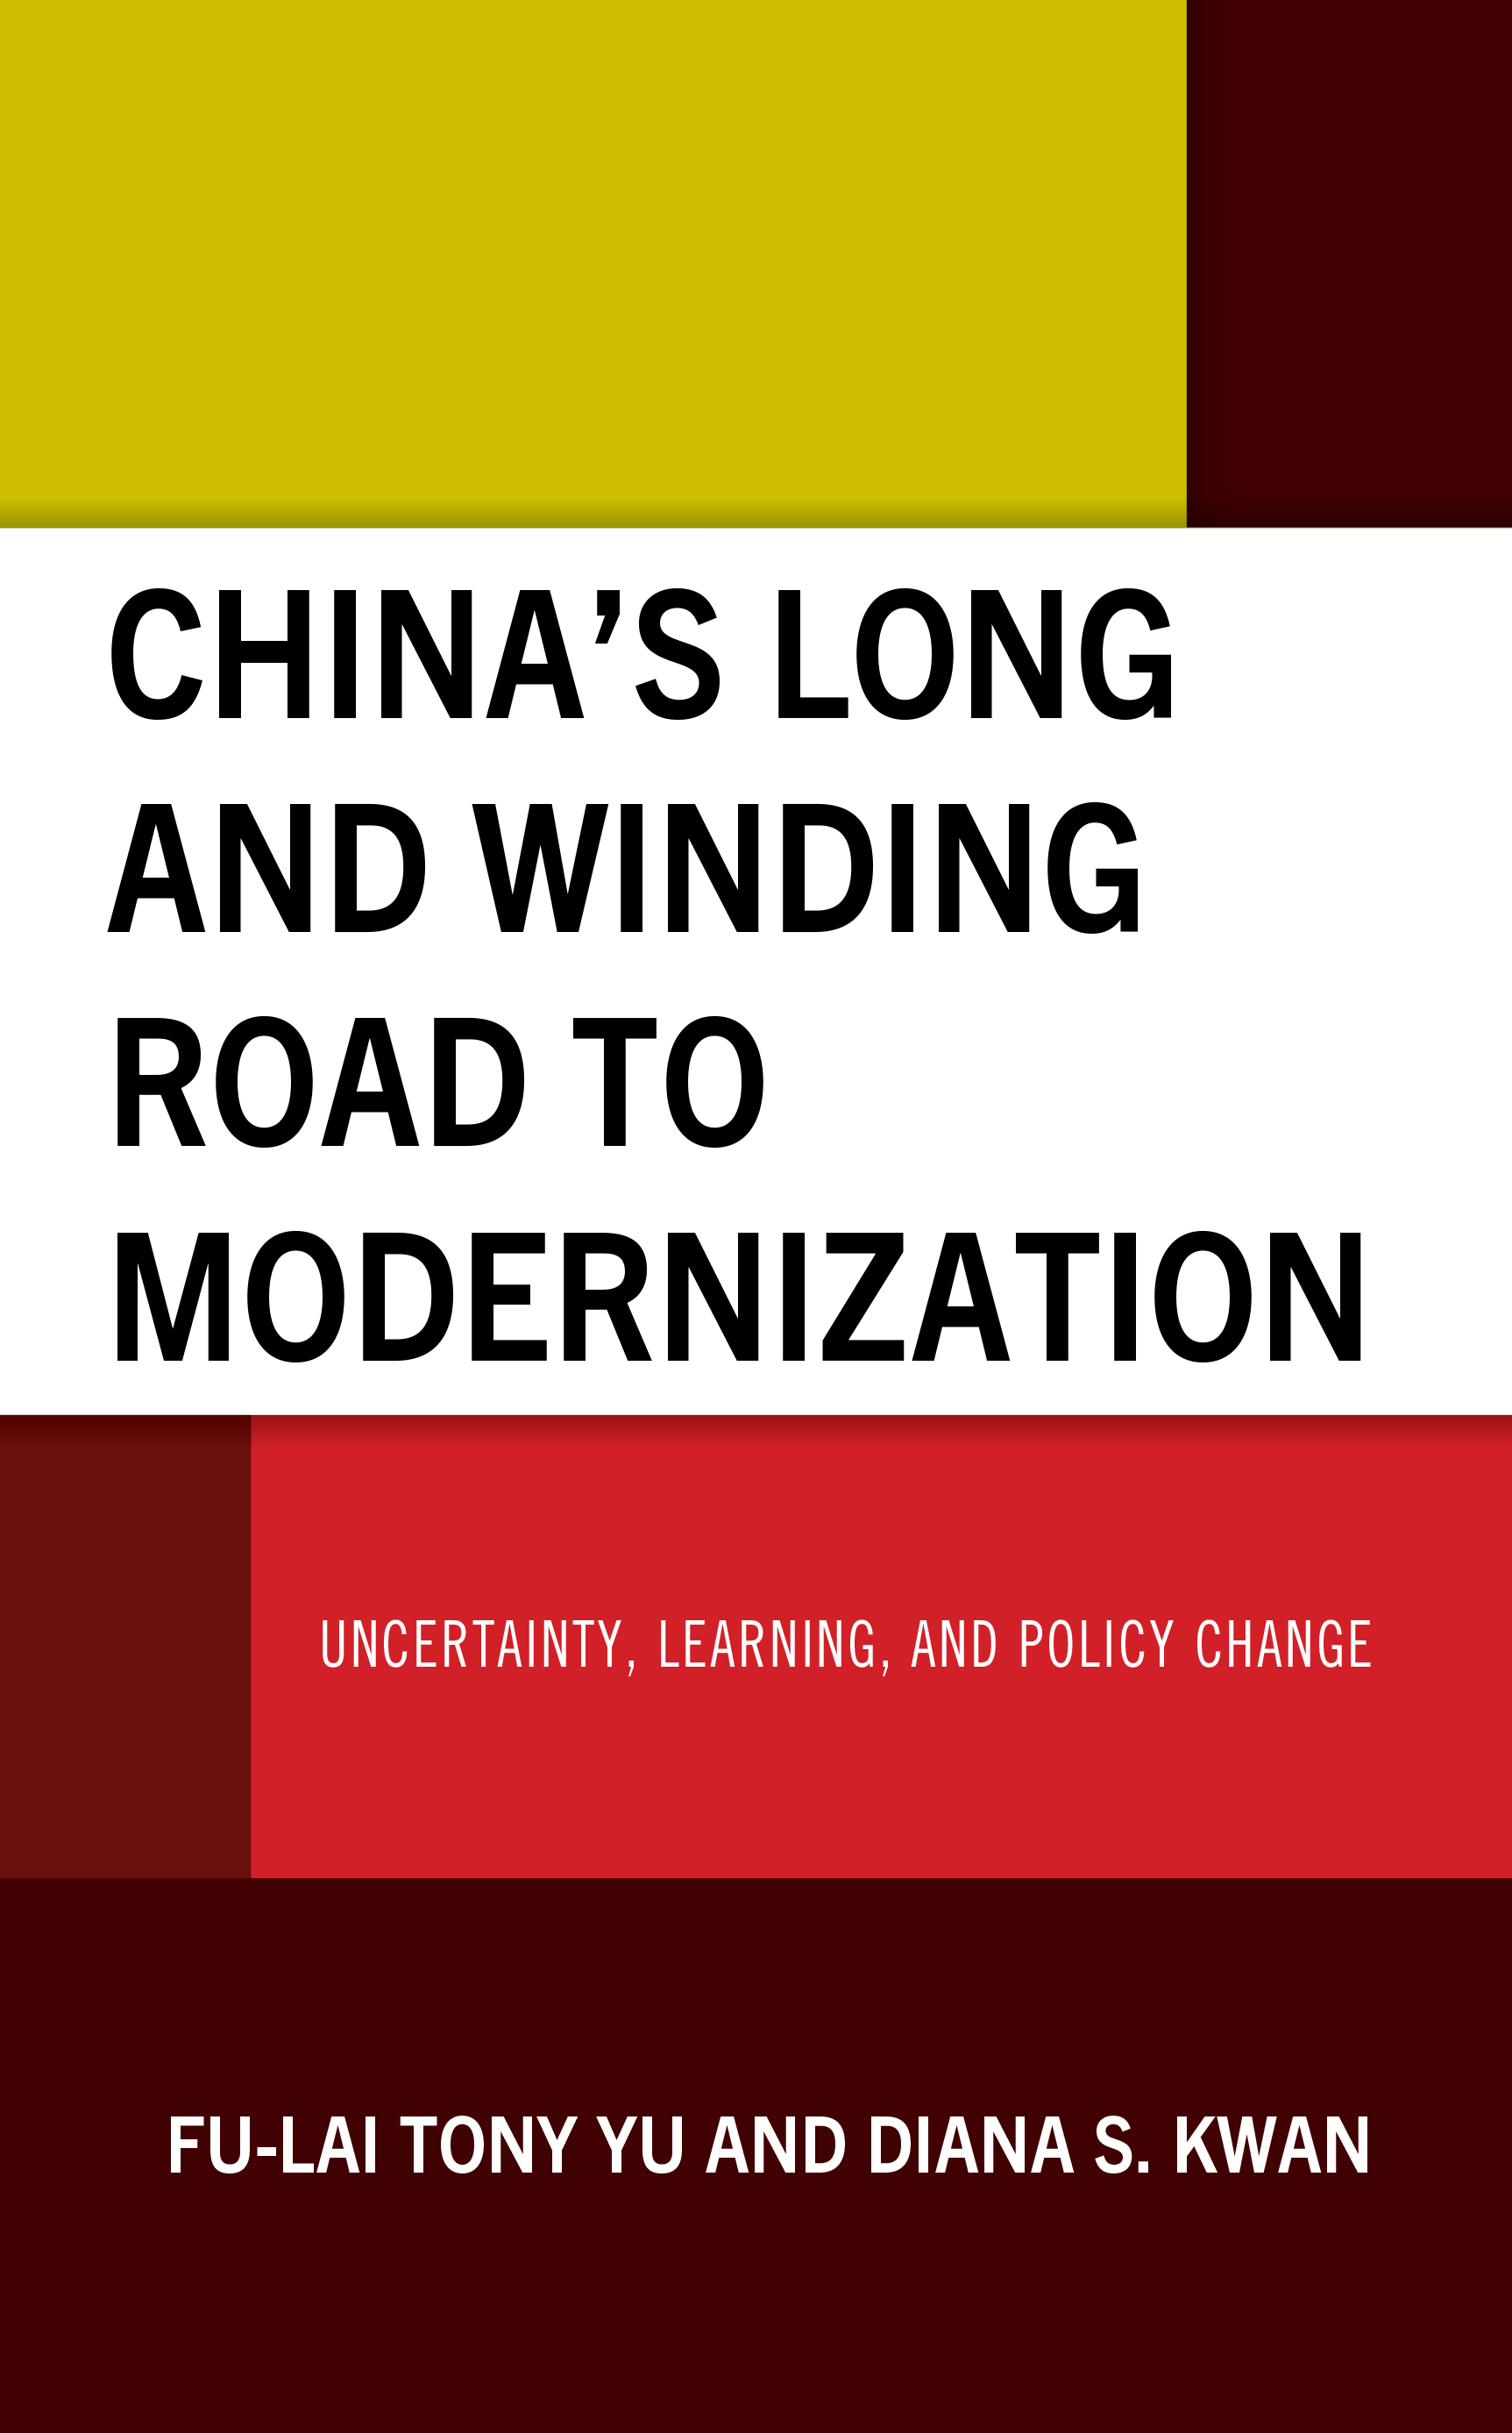 China’s Long and Winding Road to Modernization: Uncertainty, Learning, and Policy Change